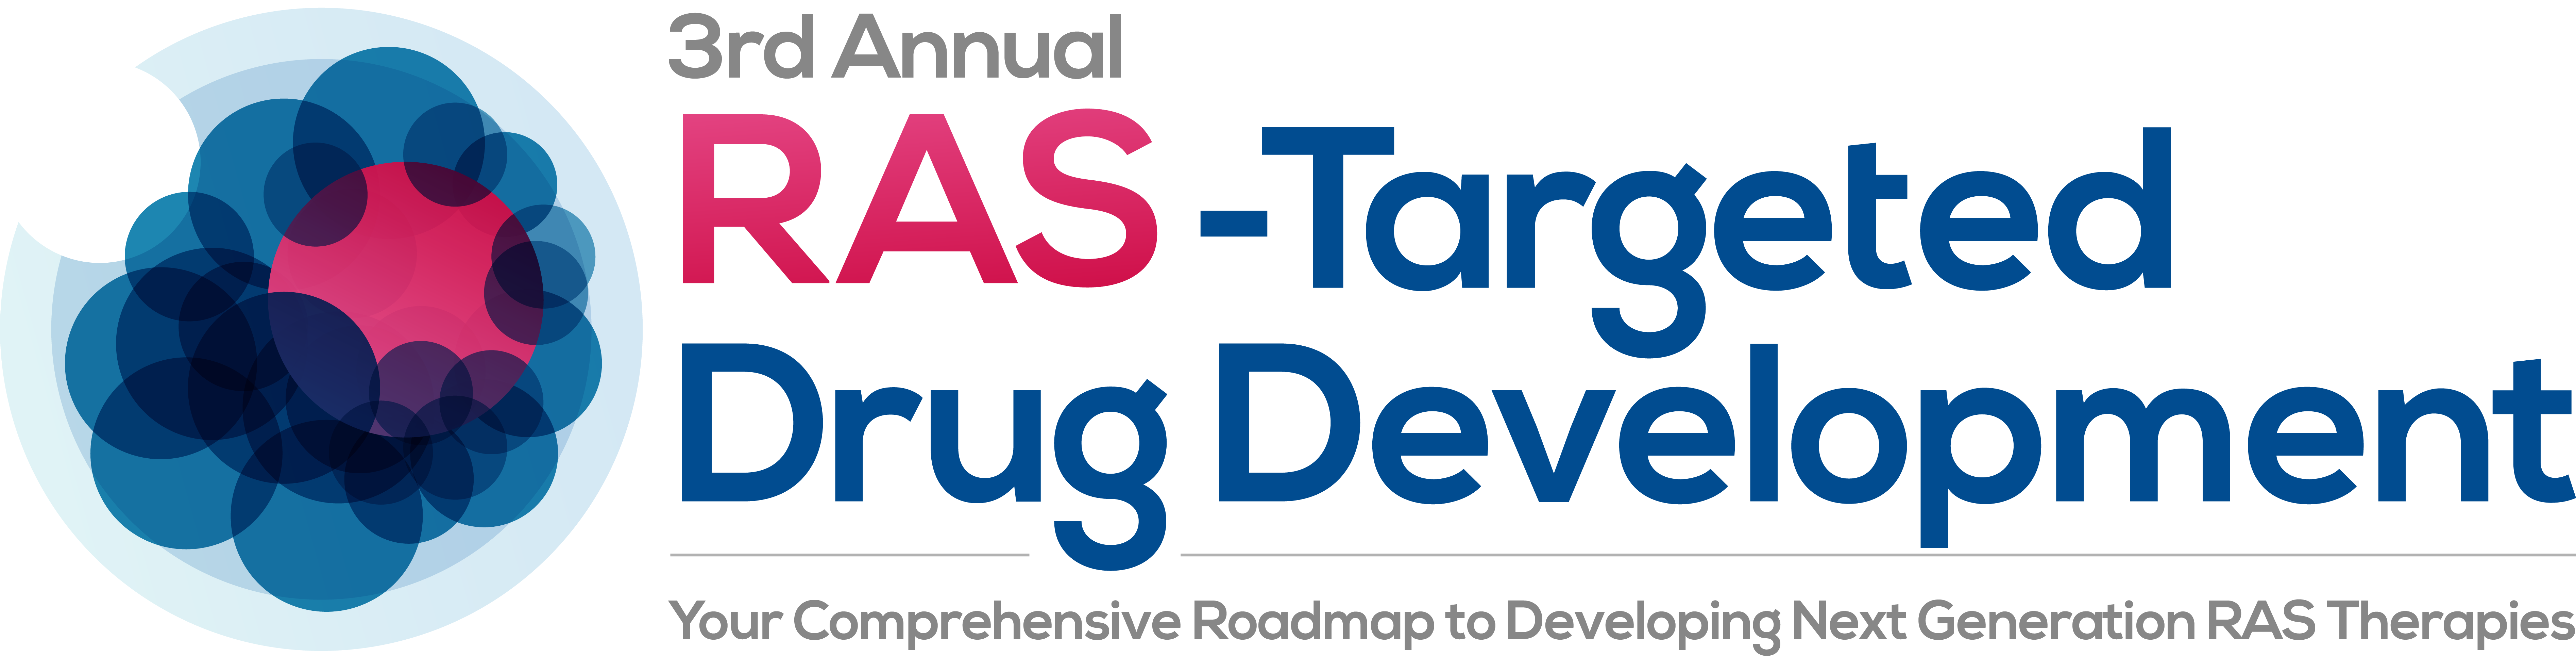 21516 3rd RAS- Targeted Drug Discovery Summit logo